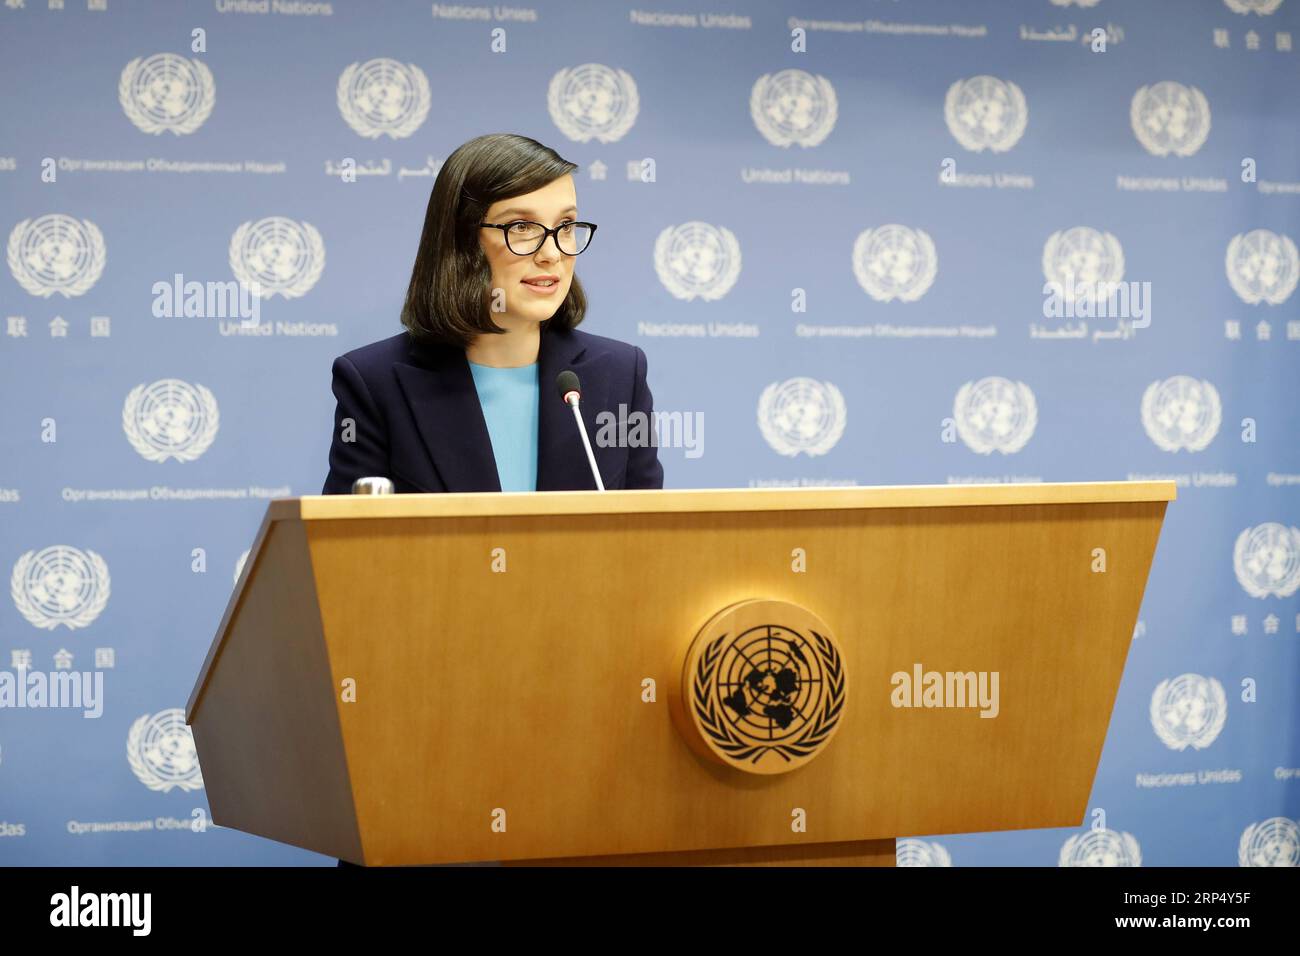 (181120) -- UNITED NATIONS, Nov. 20, 2018 -- British actress Millie Bobby Brown speaks at a press conference at the UN headquarters in New York, on Nov. 20, 2018. Millie Bobby Brown on Tuesday pledged to speak out for children s rights in her new role as the youngest goodwill ambassador of the UN children s agency. ) UN-UNICEF-GOODWILL AMBASSADOR-MILLIE BOBBY BROWN-PRESS CONFERENCE LixMuzi PUBLICATIONxNOTxINxCHN Stock Photo